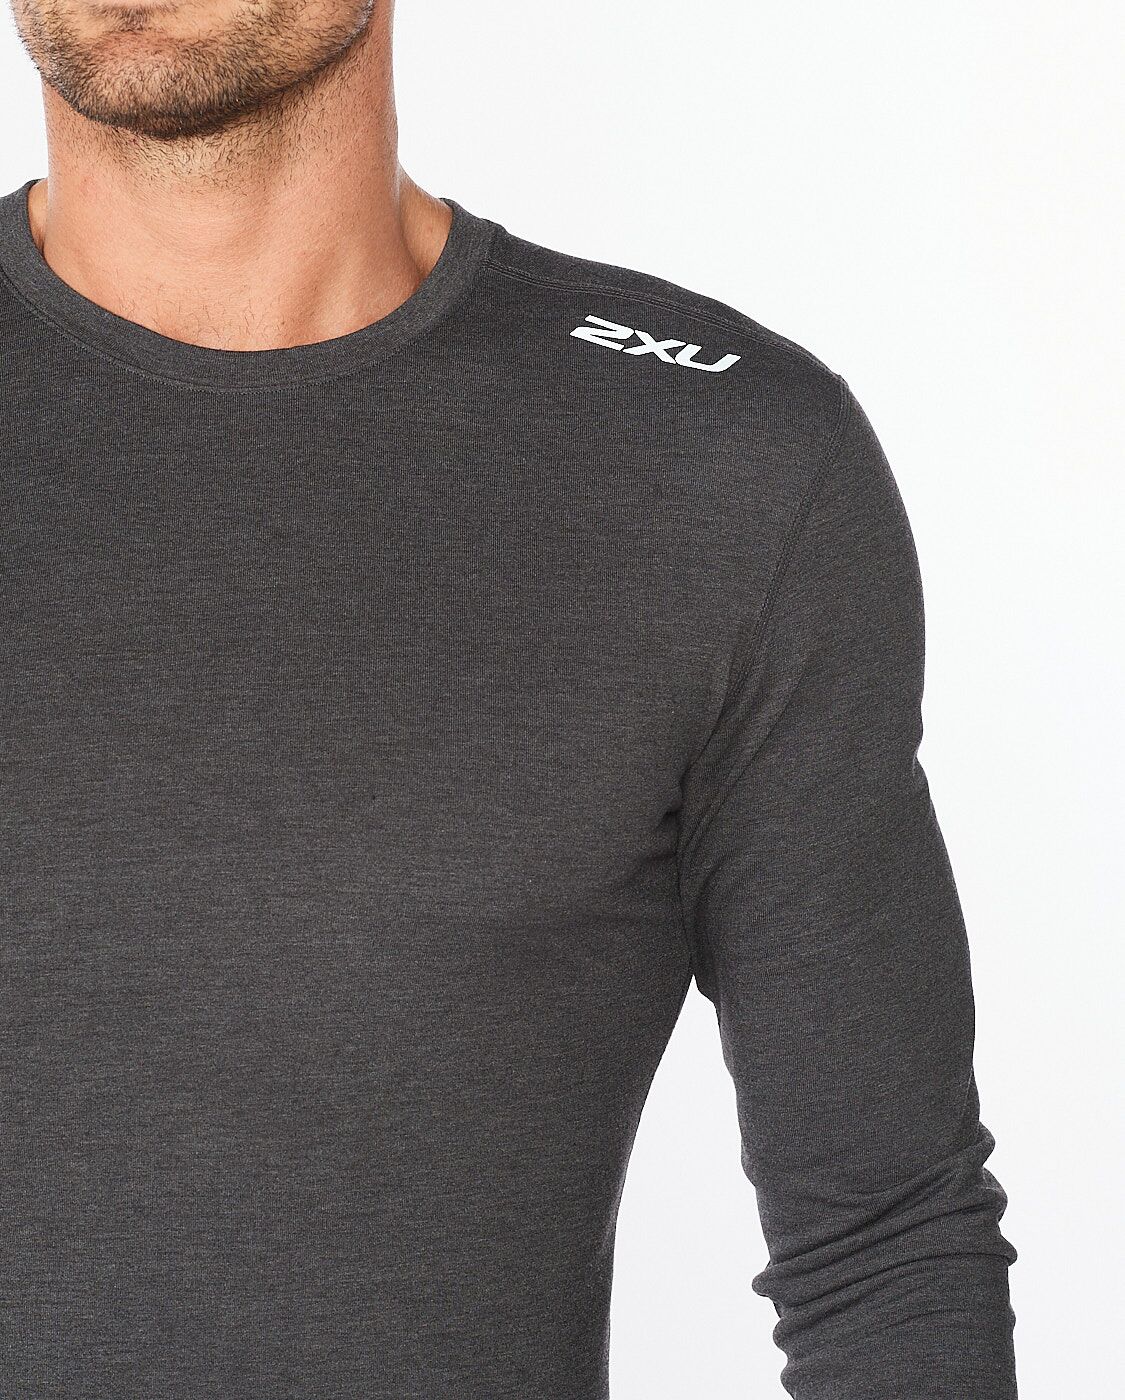 2XU South Africa - Mens Ignition Base Layer L/S - Black Marle/Silver Reflective